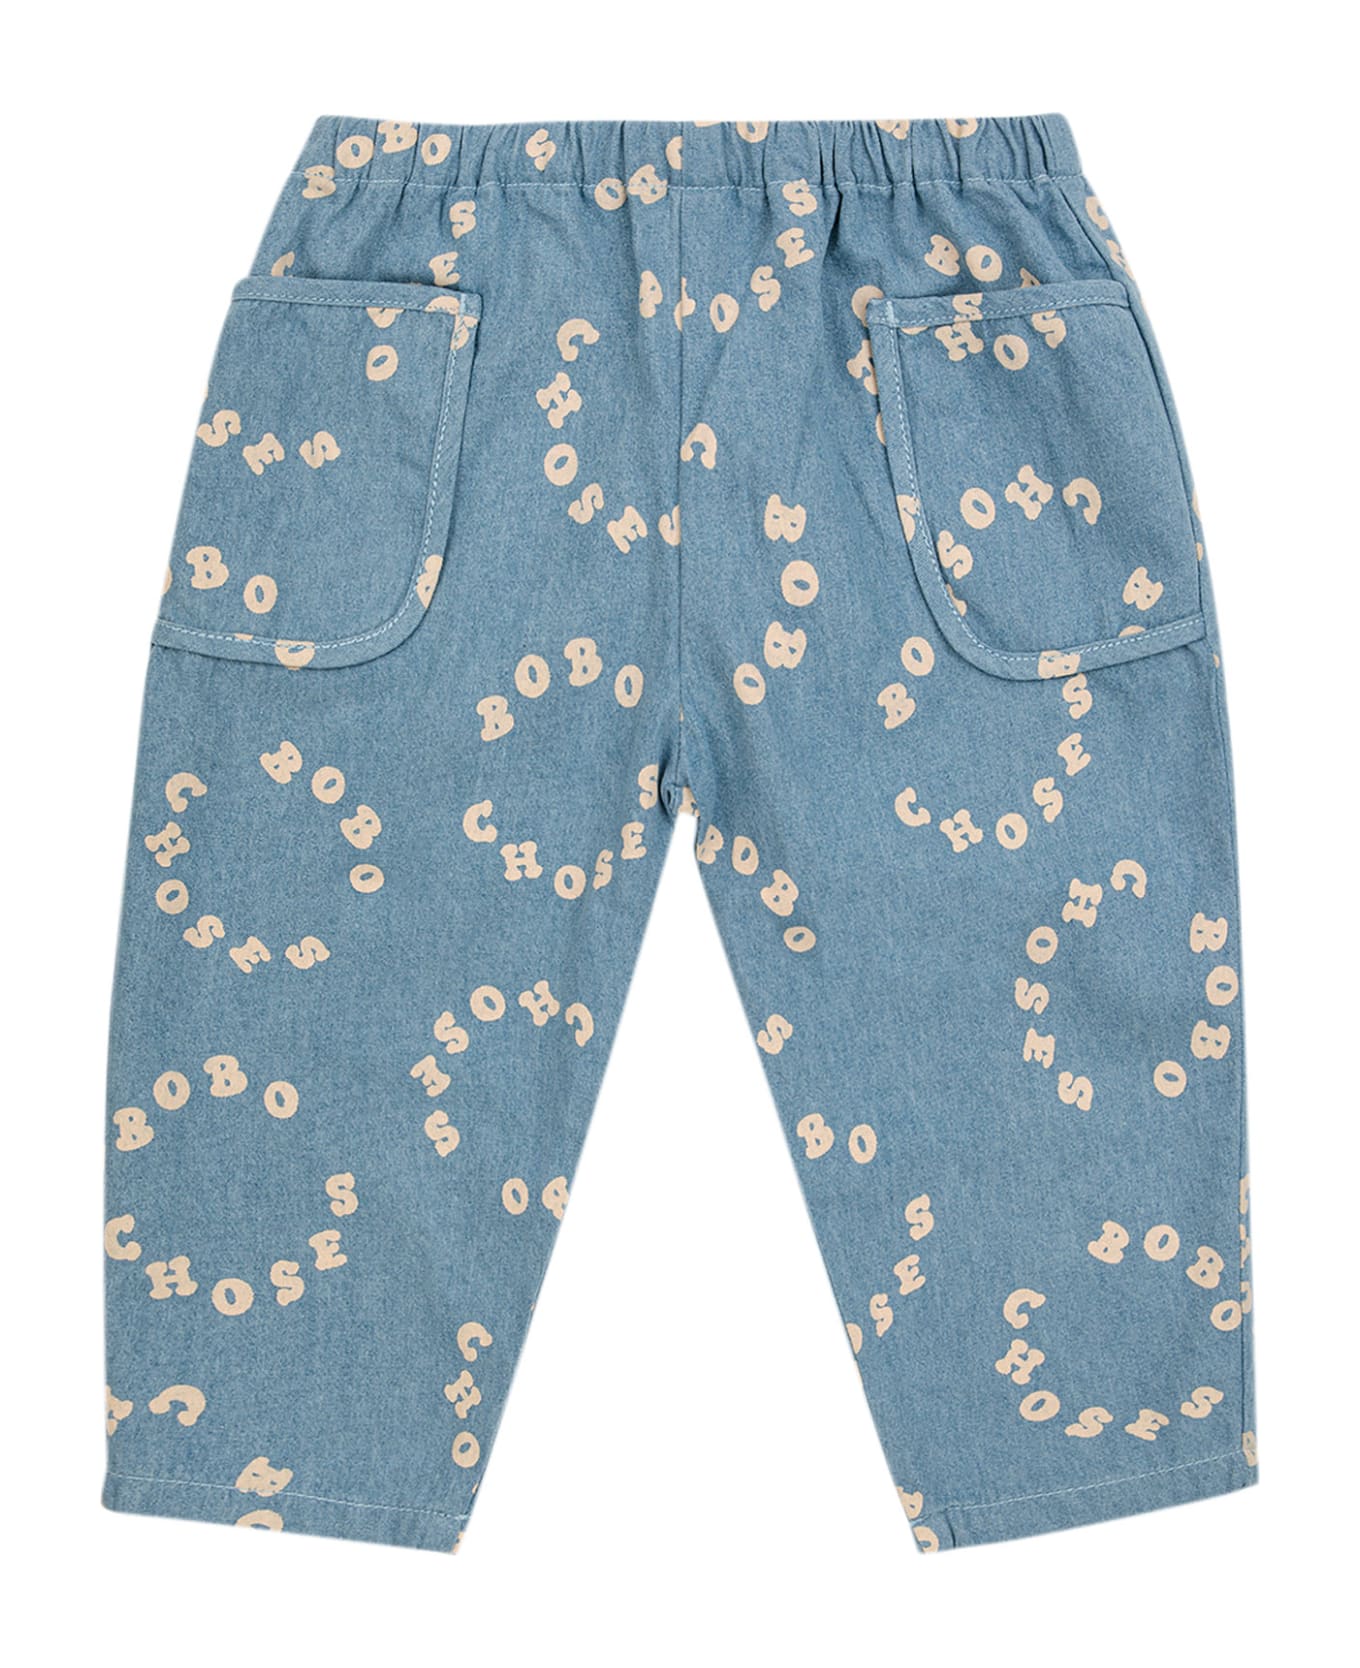 Bobo Choses Denim Jeans For Babies With All-over Circle Logo - Denim